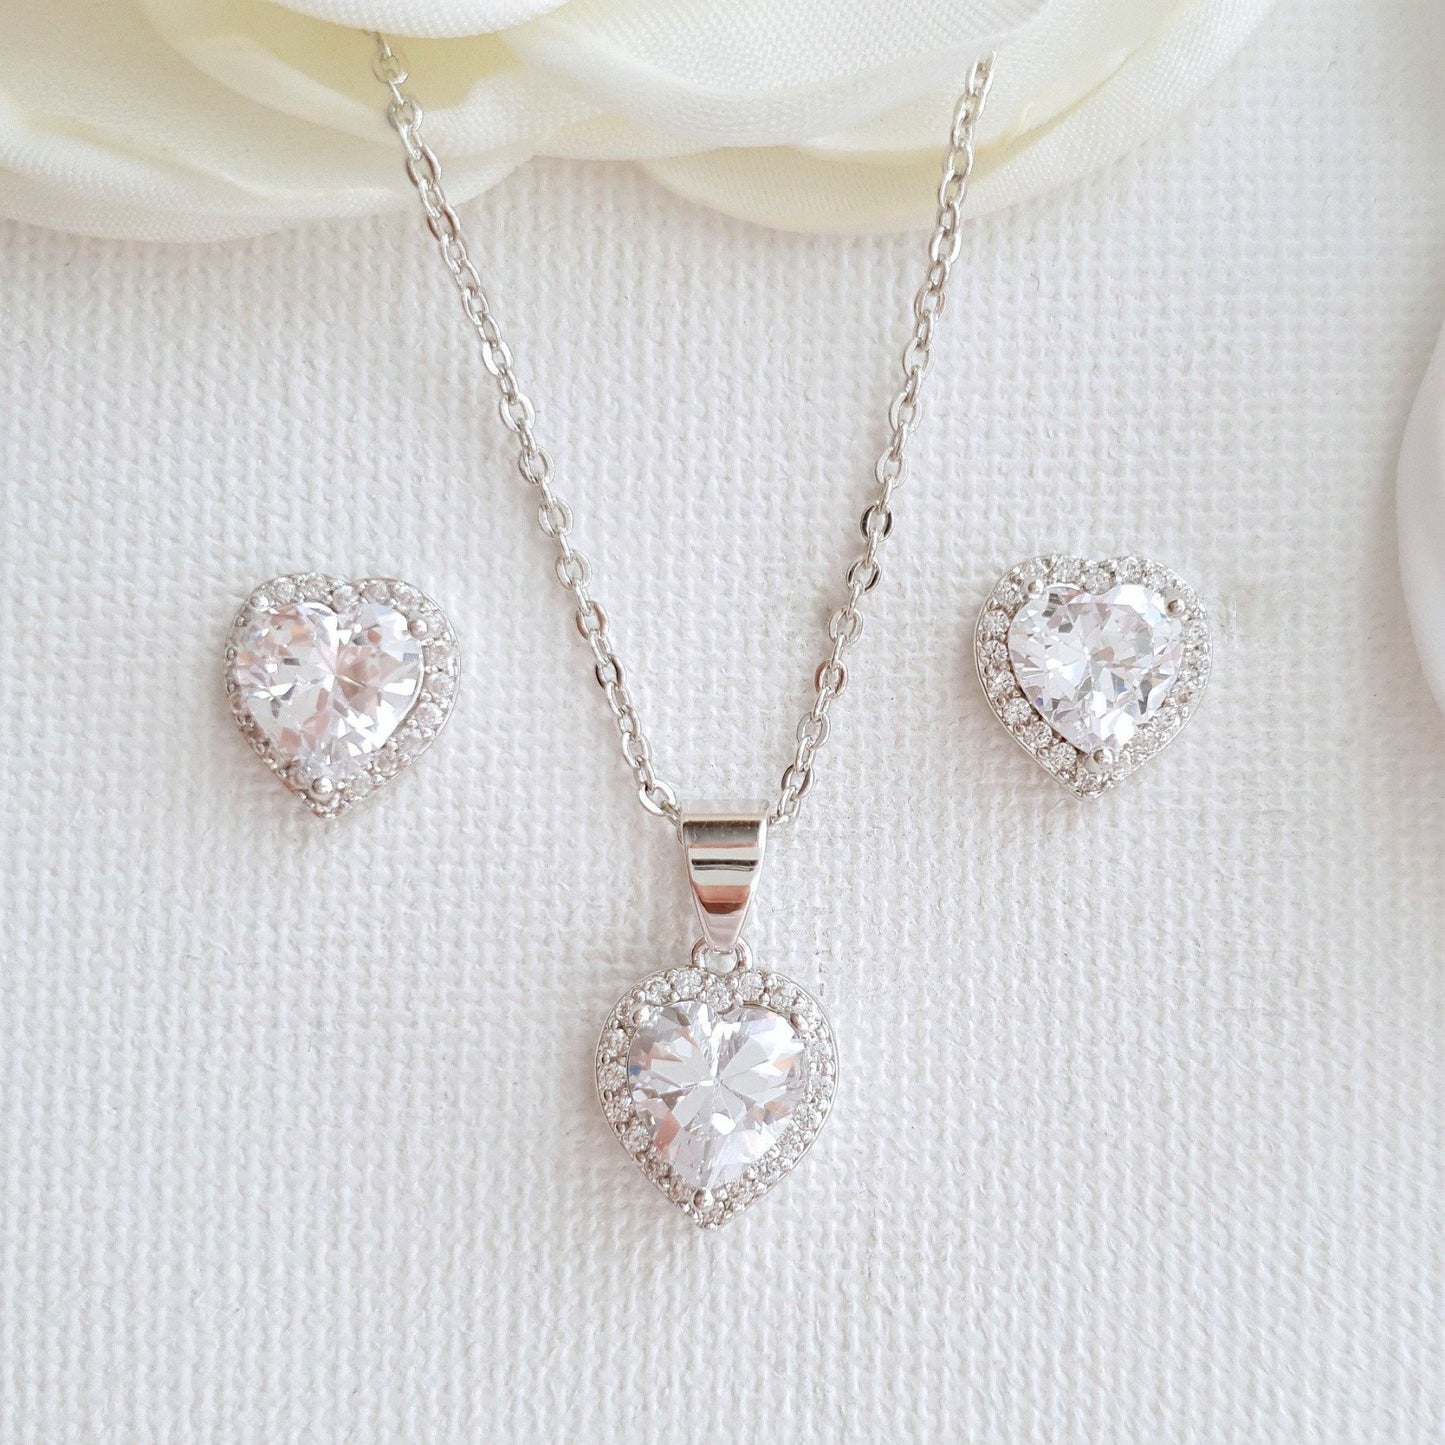 Rose Gold Bridesmaids Jewelry Set with Heart Stud Earrings & Necklace-Diana - PoetryDesigns